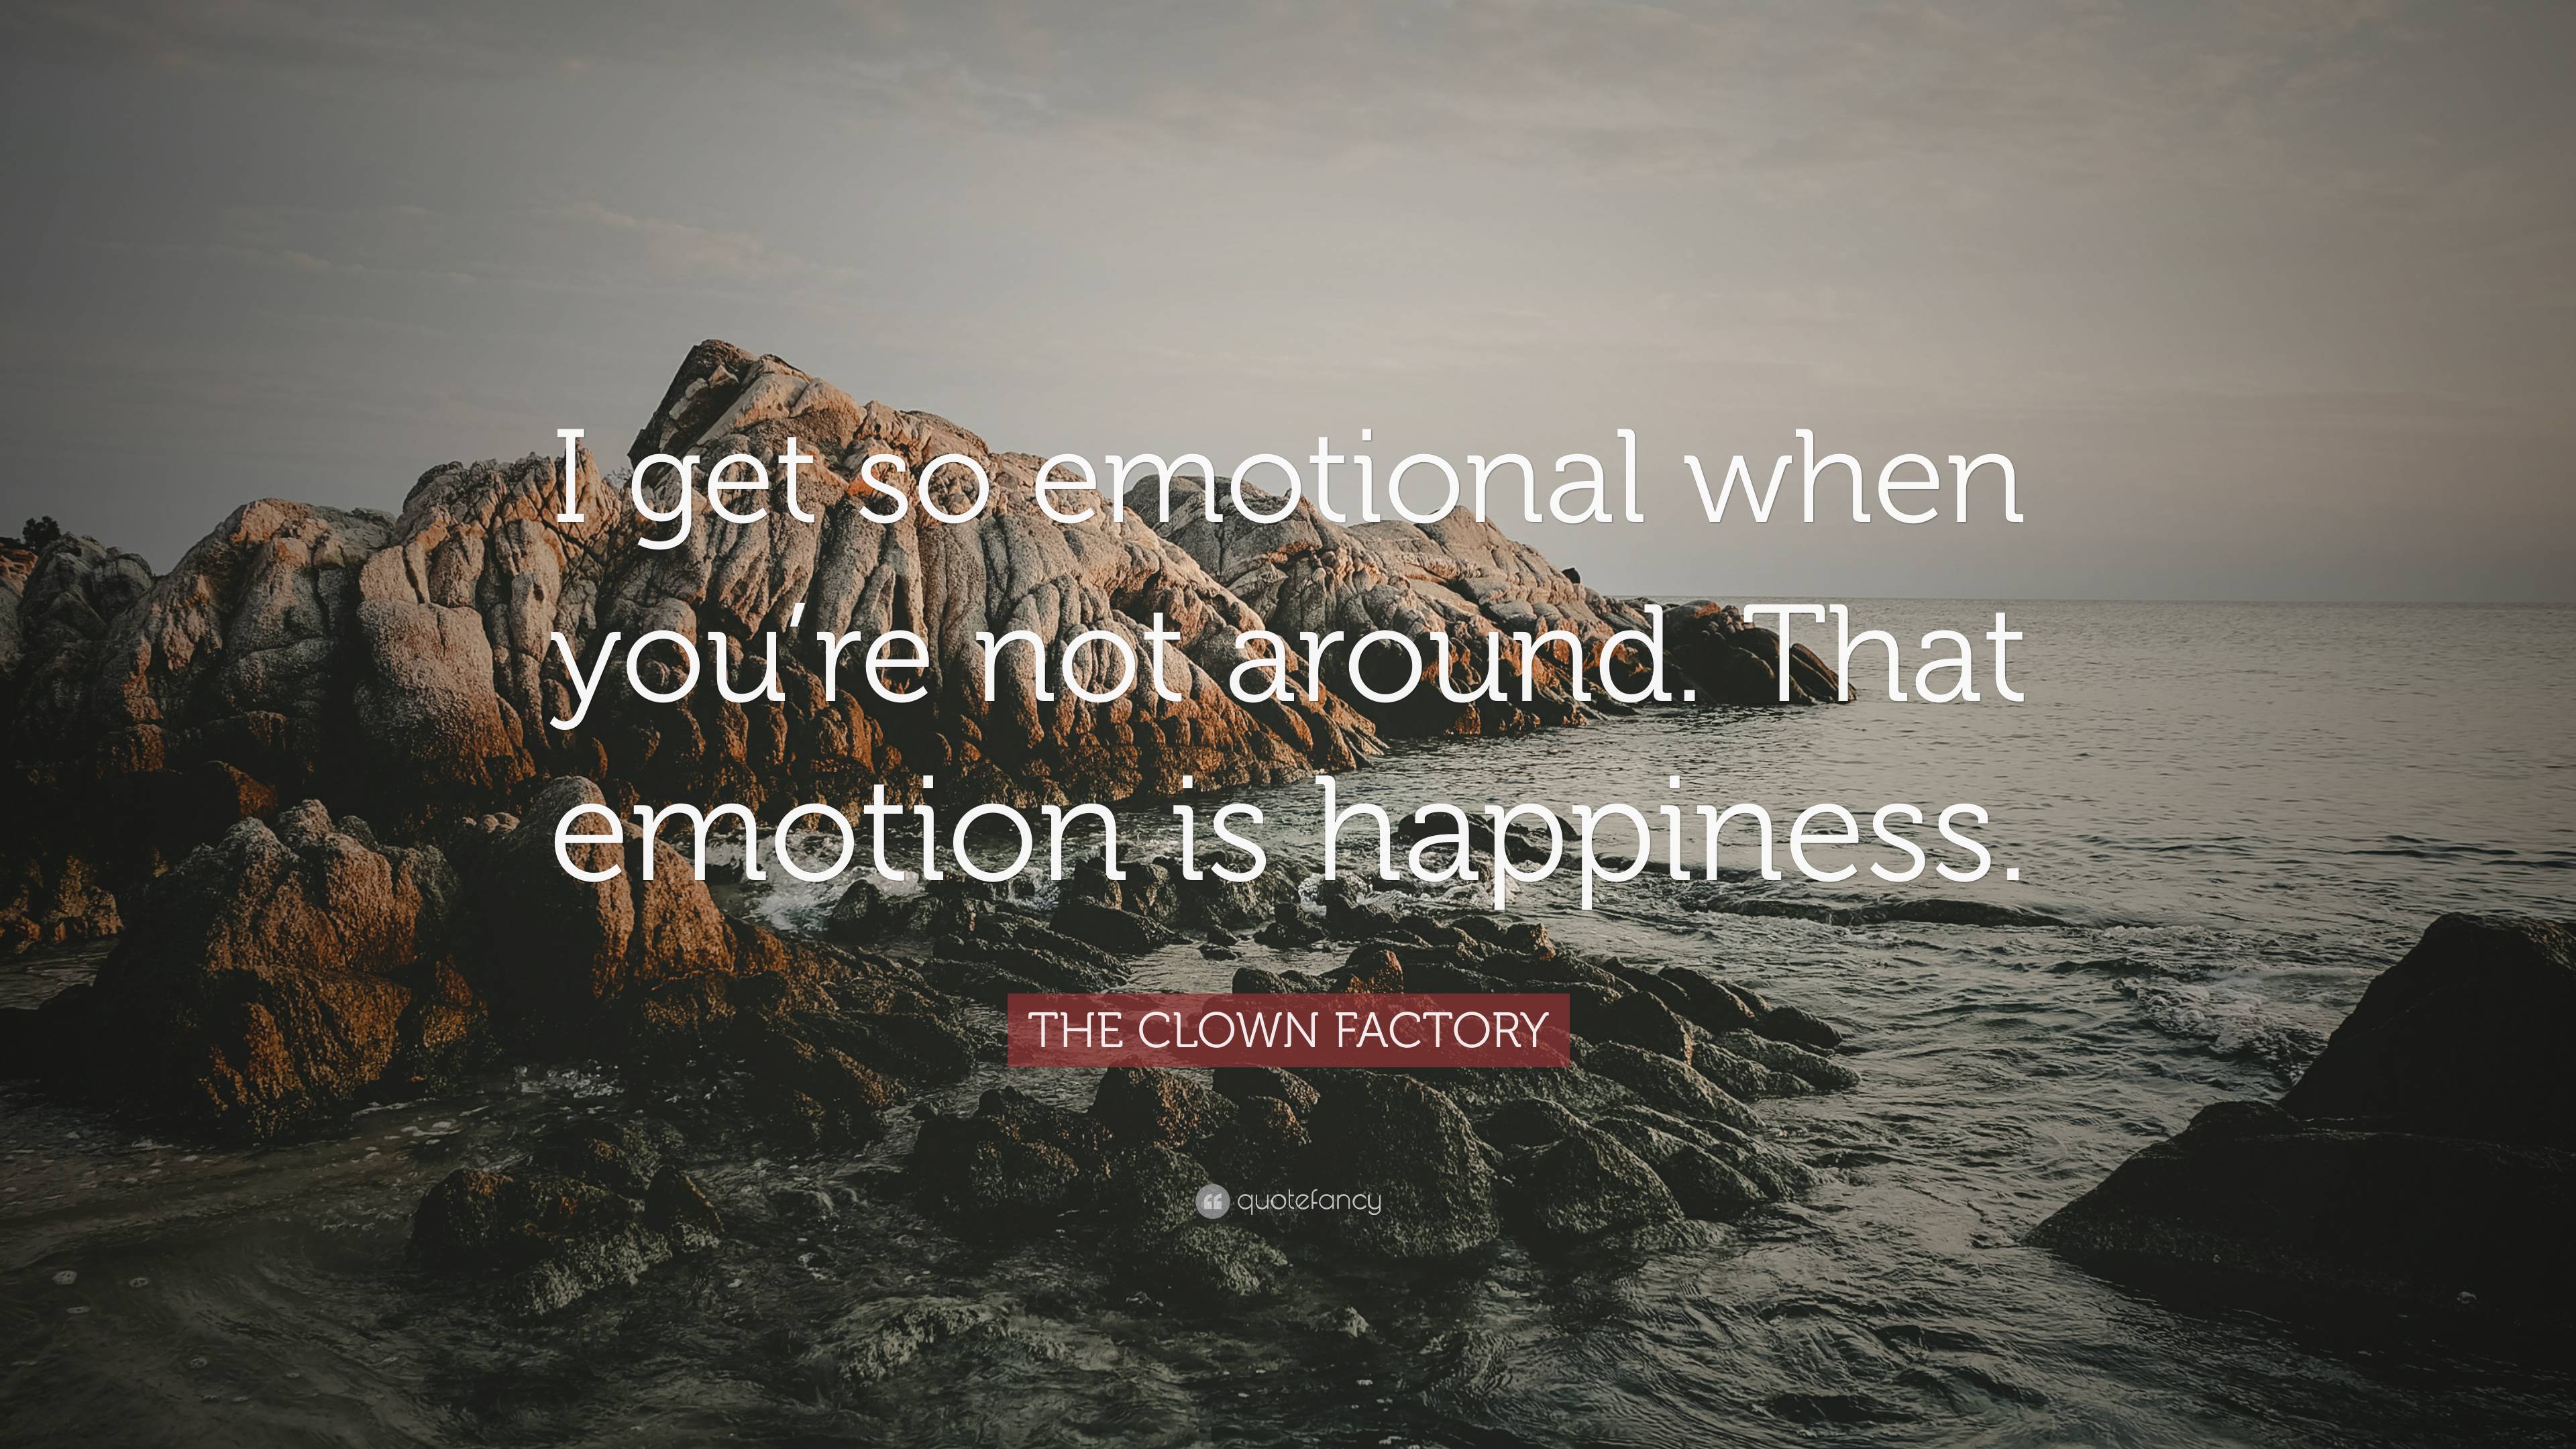 THE CLOWN FACTORY Quote: “I get so emotional when you’re not around ...